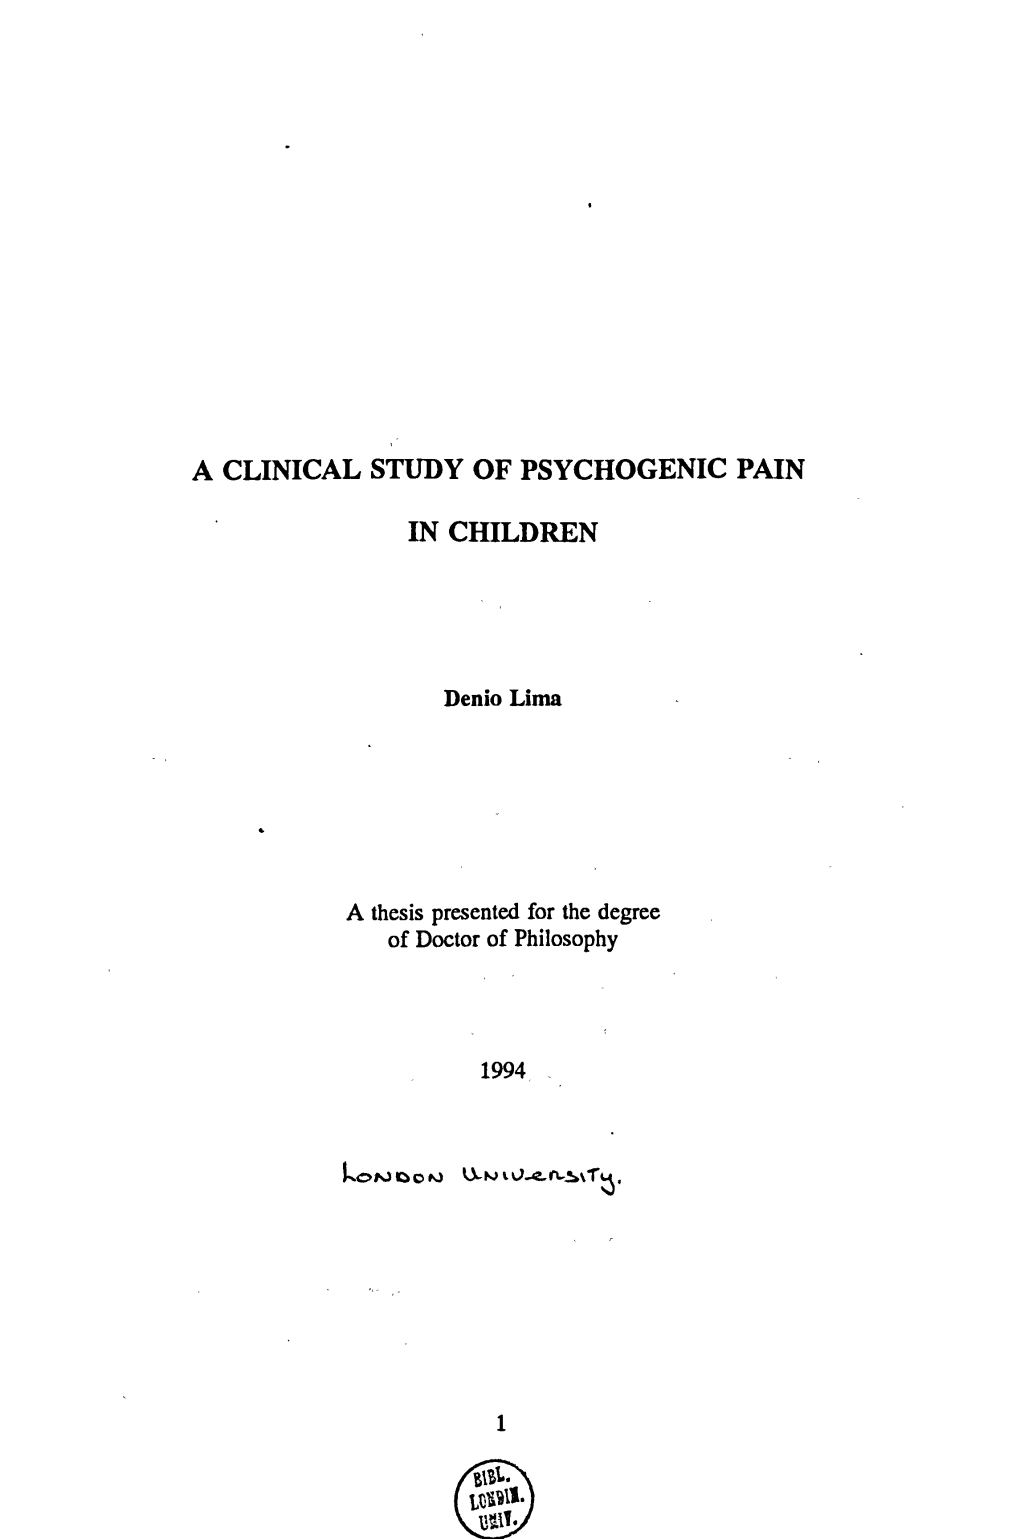 A Clinical Study of Psychogenic Pain in Children